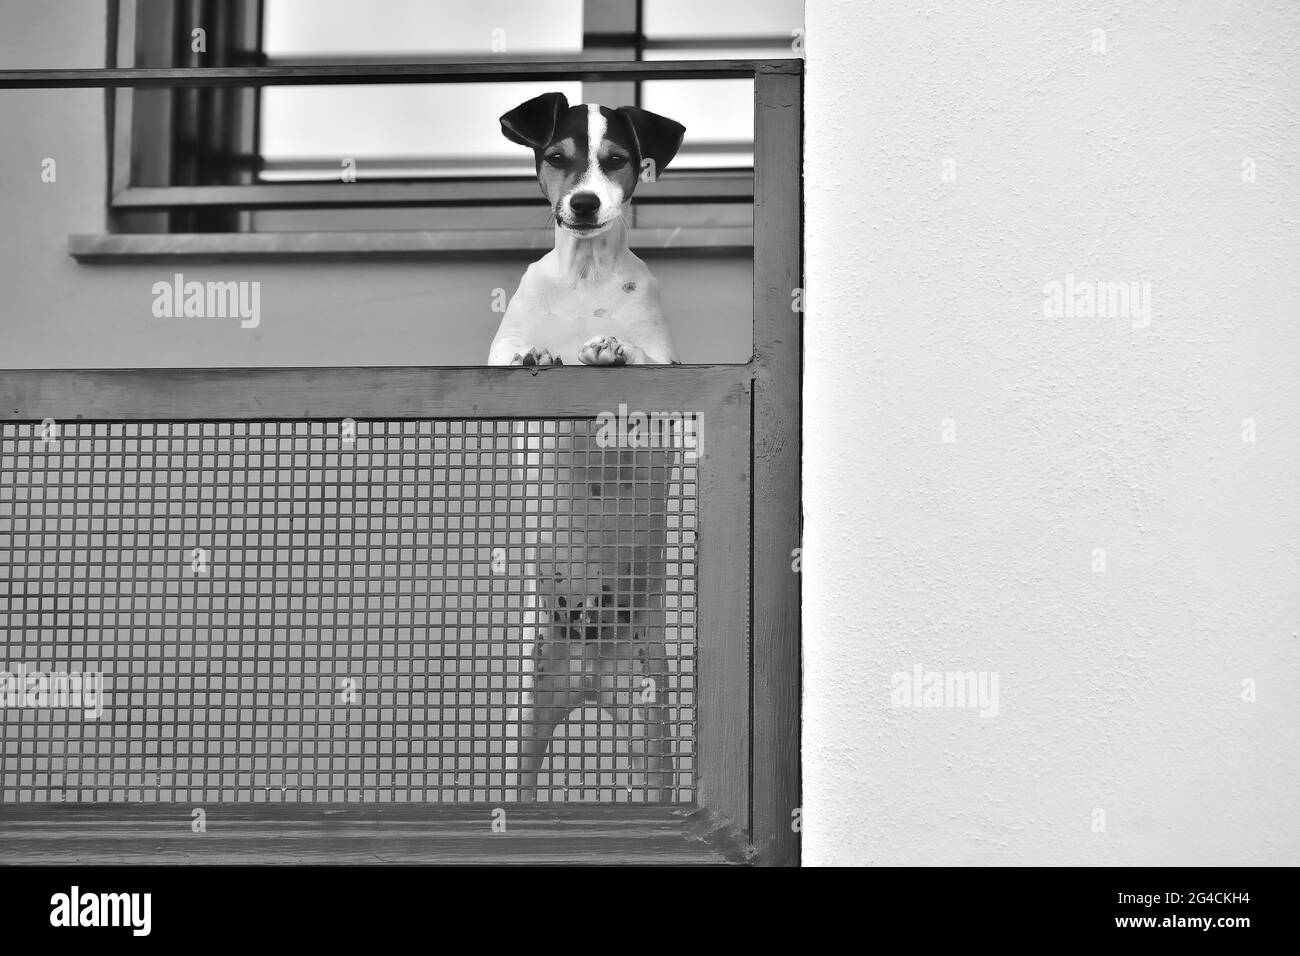 Black and white photo of a dog standing on its hind legs observing us behind the railing with lattice of a balcony Stock Photo